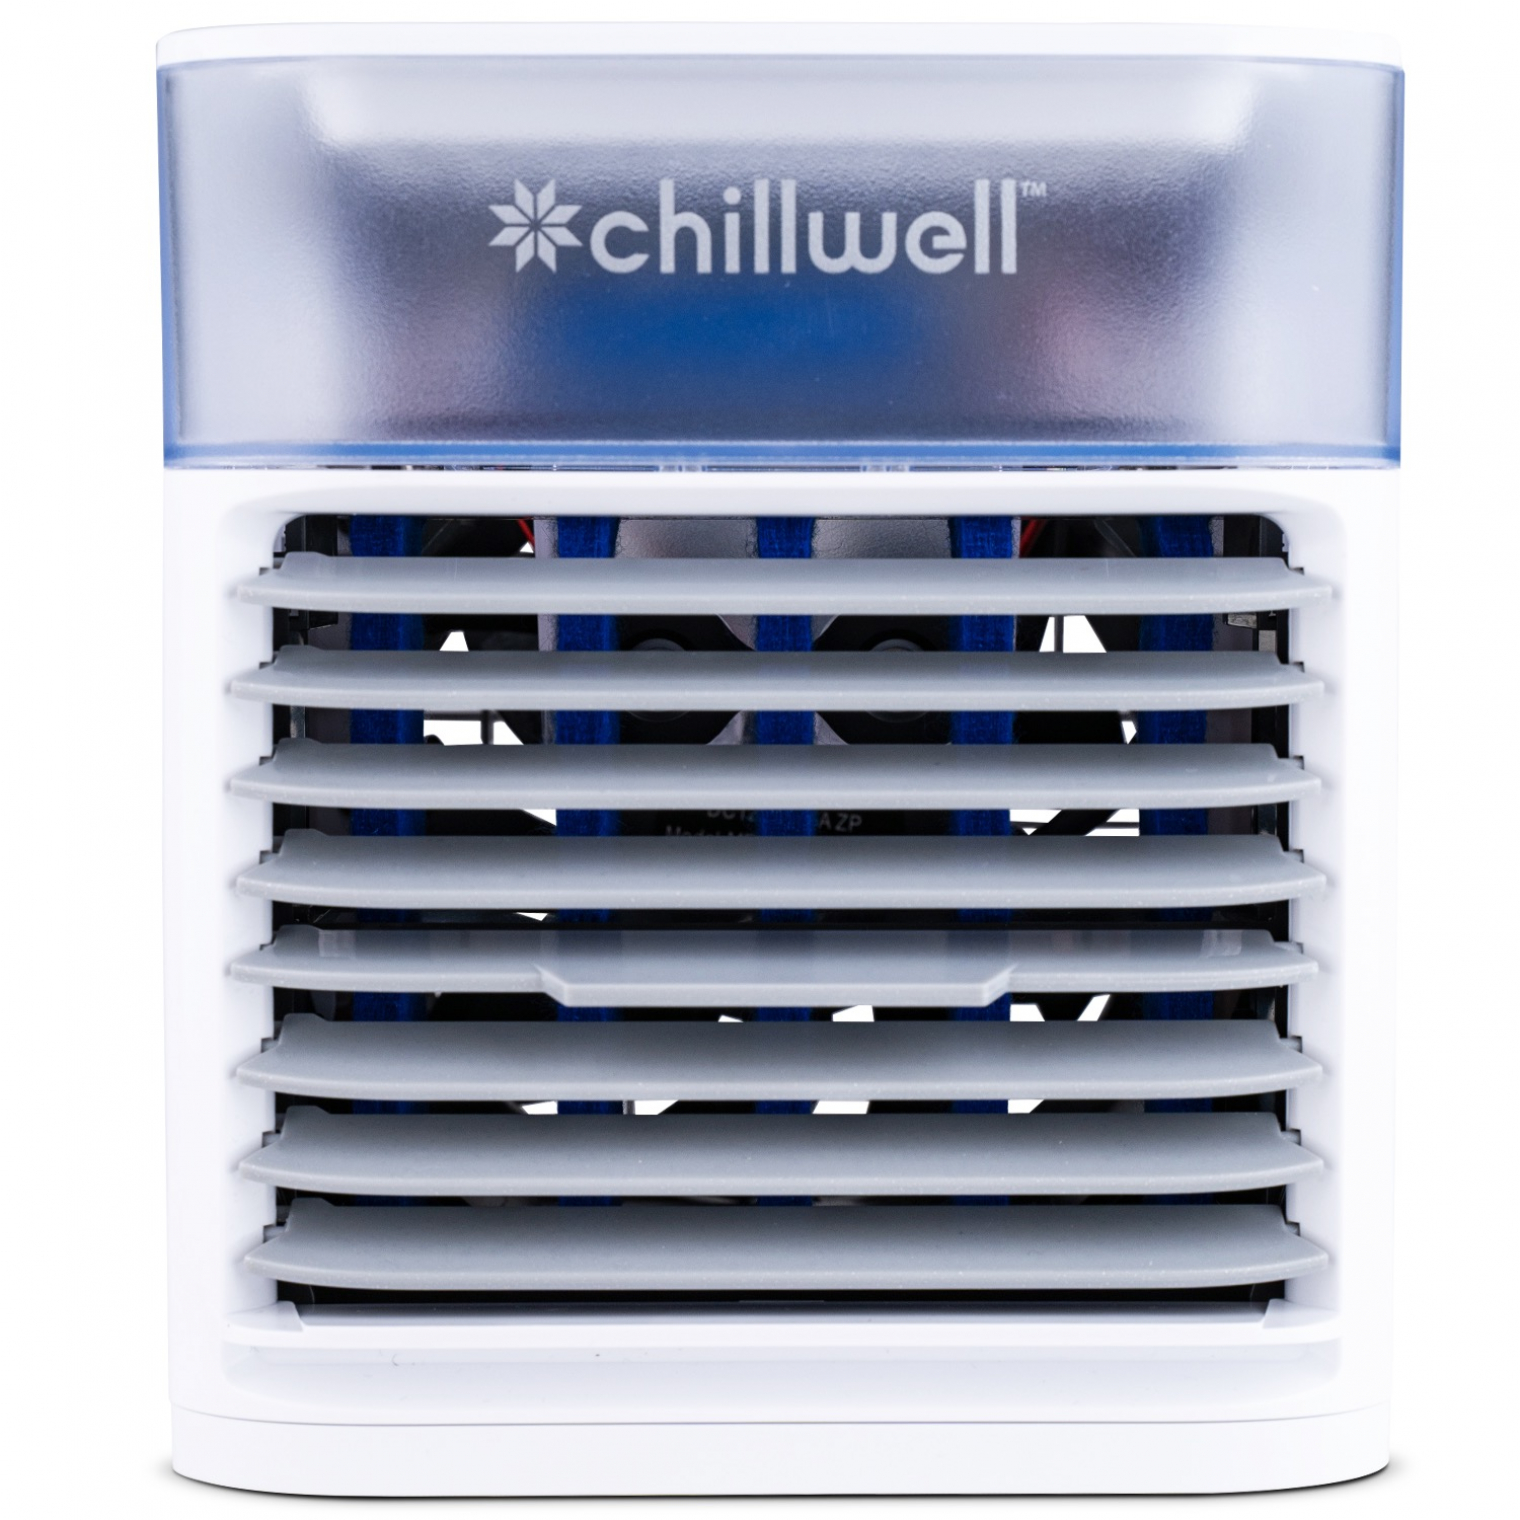 Chillwell Ac Portable Air Cooler Reviews